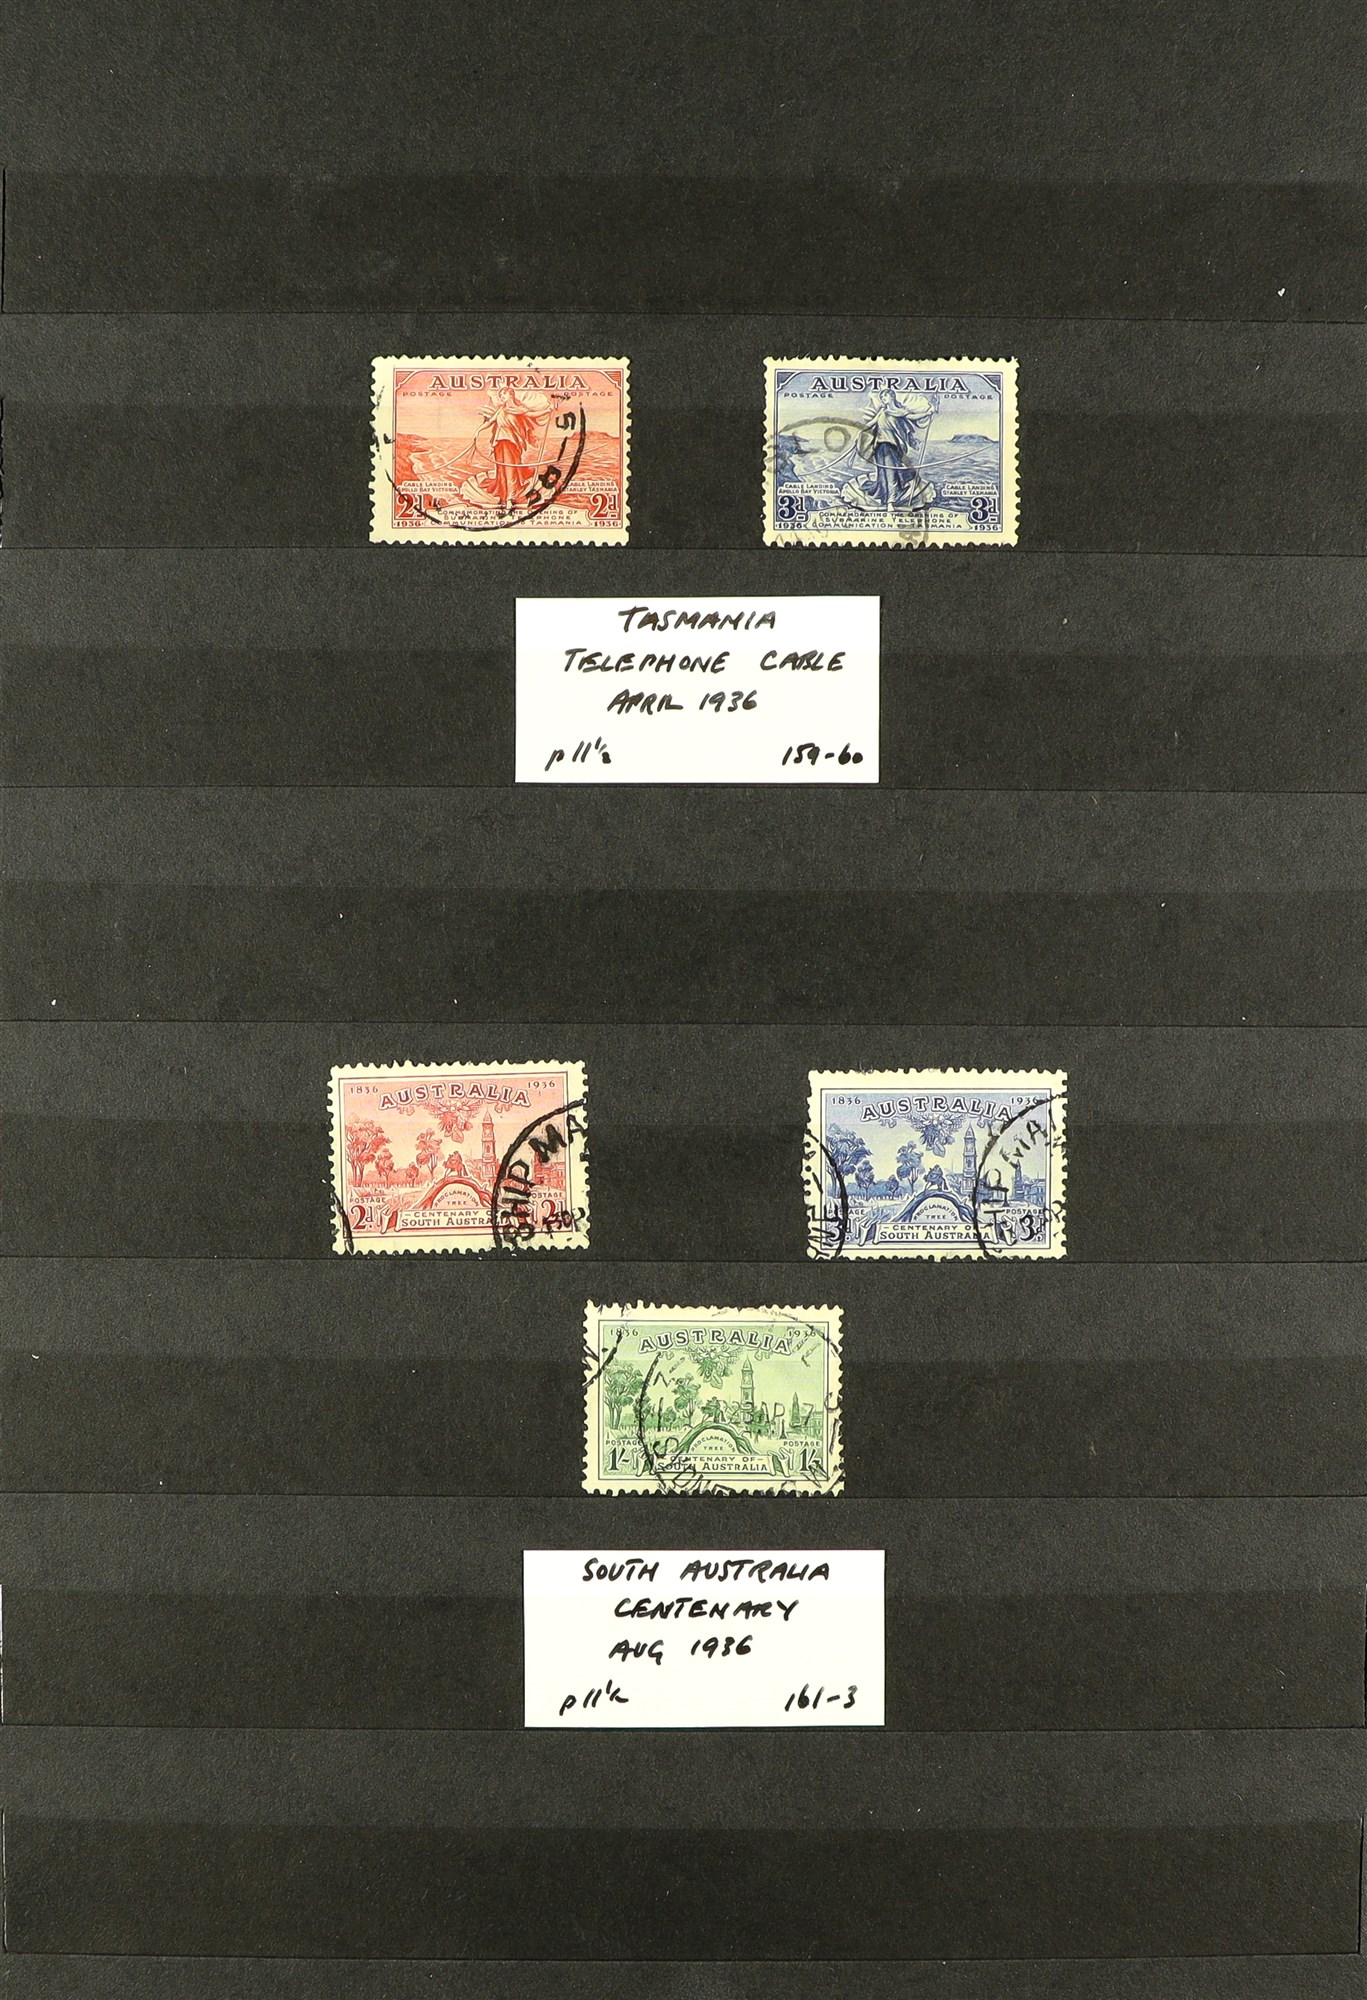 AUSTRALIA 1914 -1936 COLLECTION of 42 used stamps, a complete run of commemorative sets to 1936, - Image 4 of 6